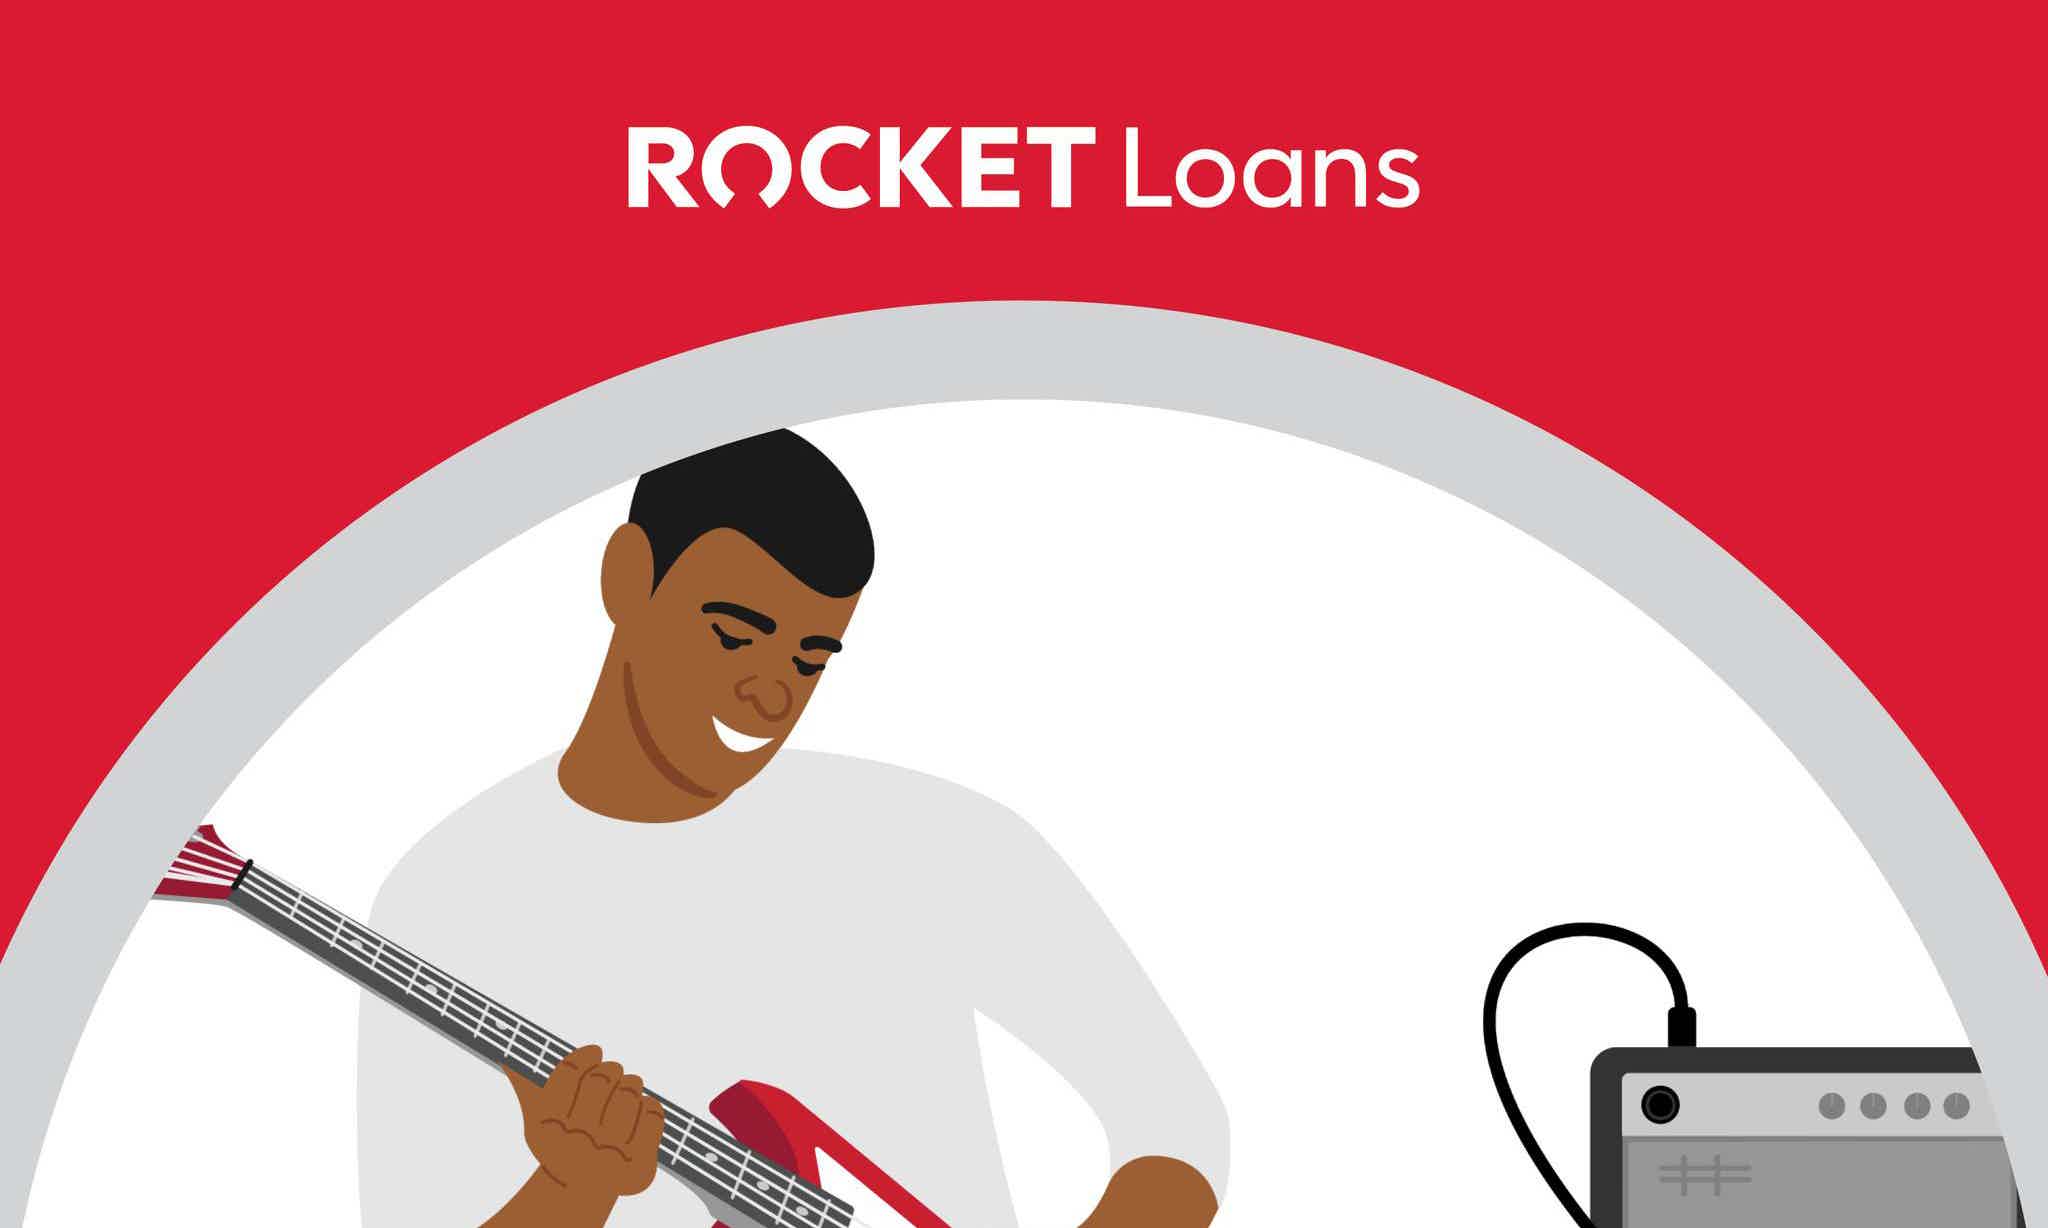 See how to apply online. Source: Facebook Rocket Loans.